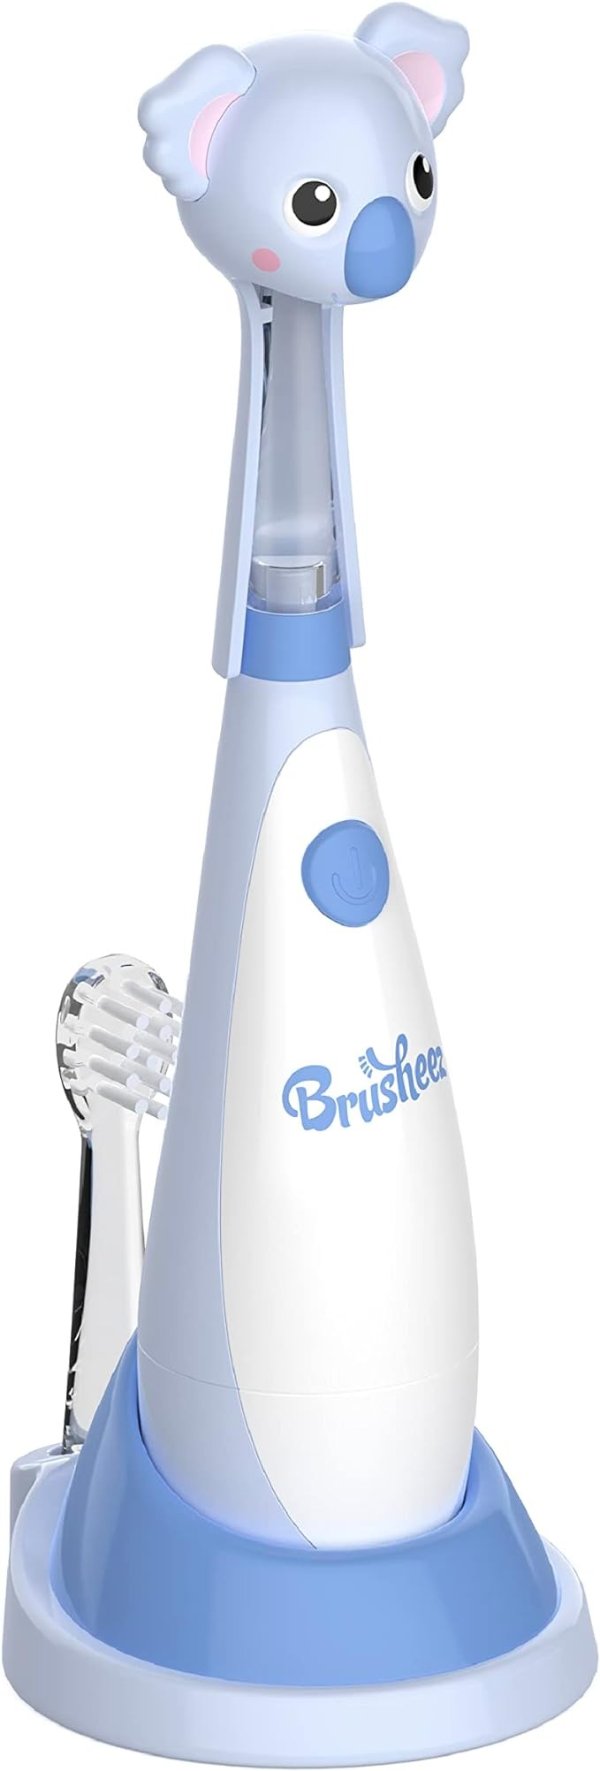 Little Toddlers Sonic Toothbrush - Safe & Gentle Toothbrush for Ages 1-3 with Built-in, Light-Up 2-Minute Timer, Extra Brush Head, & Storage Base for First-Time Brushers (Kiwi The Koala)